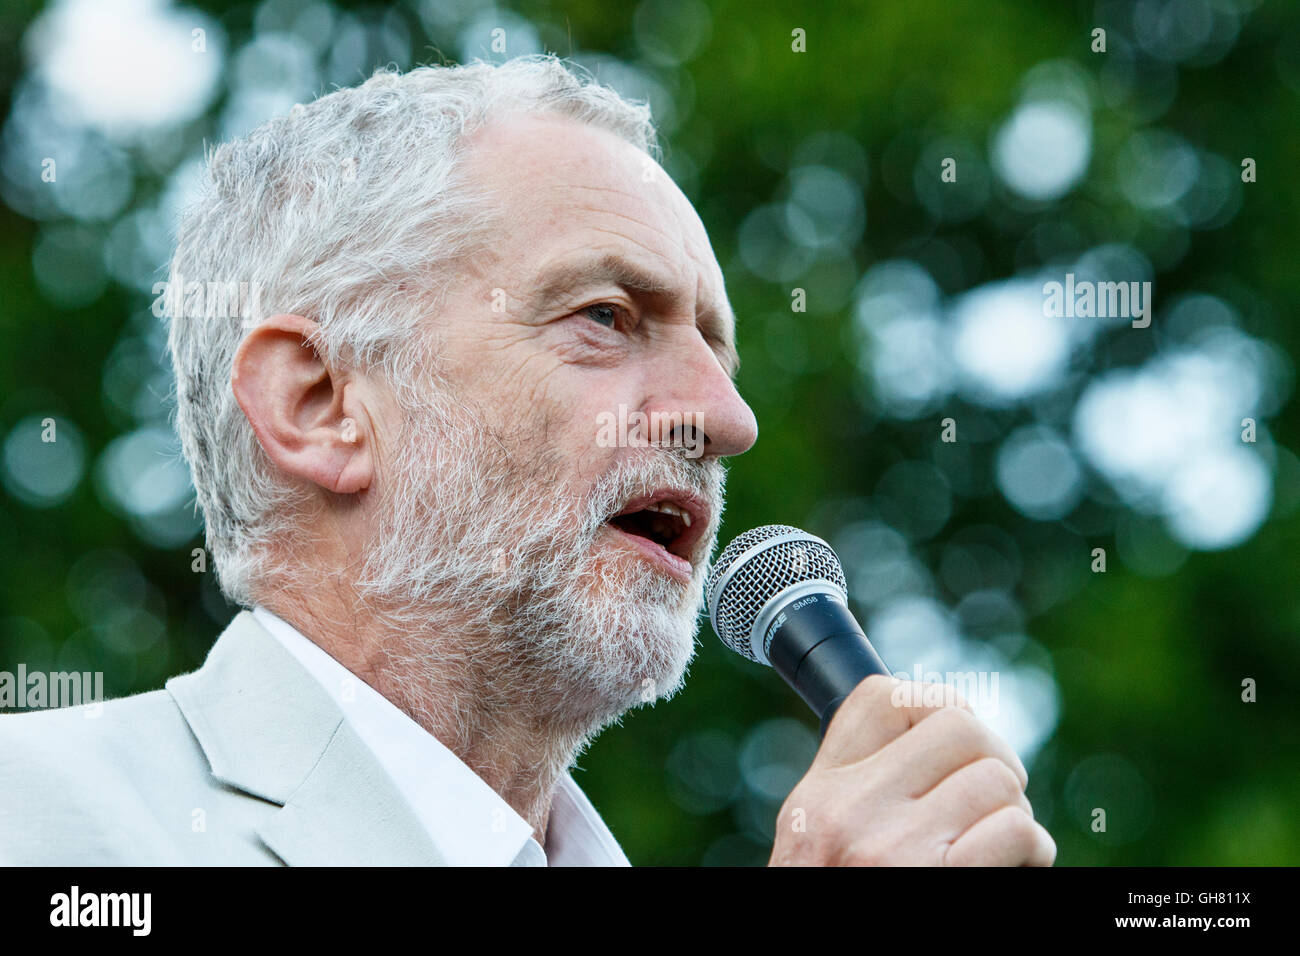 Bristol, UK, 8th August, 2016. Jeremy Corbyn is pictured speaking to supporters at a rally in College Green,Bristol. The rally was held so that Jeremy Corbyn could engage with Labour party members and explain to them the reasons why he should be re-elected leader of the Labour Party and how a Corbyn led government could transform Britain. Credit:  lynchpics/Alamy Live News Stock Photo